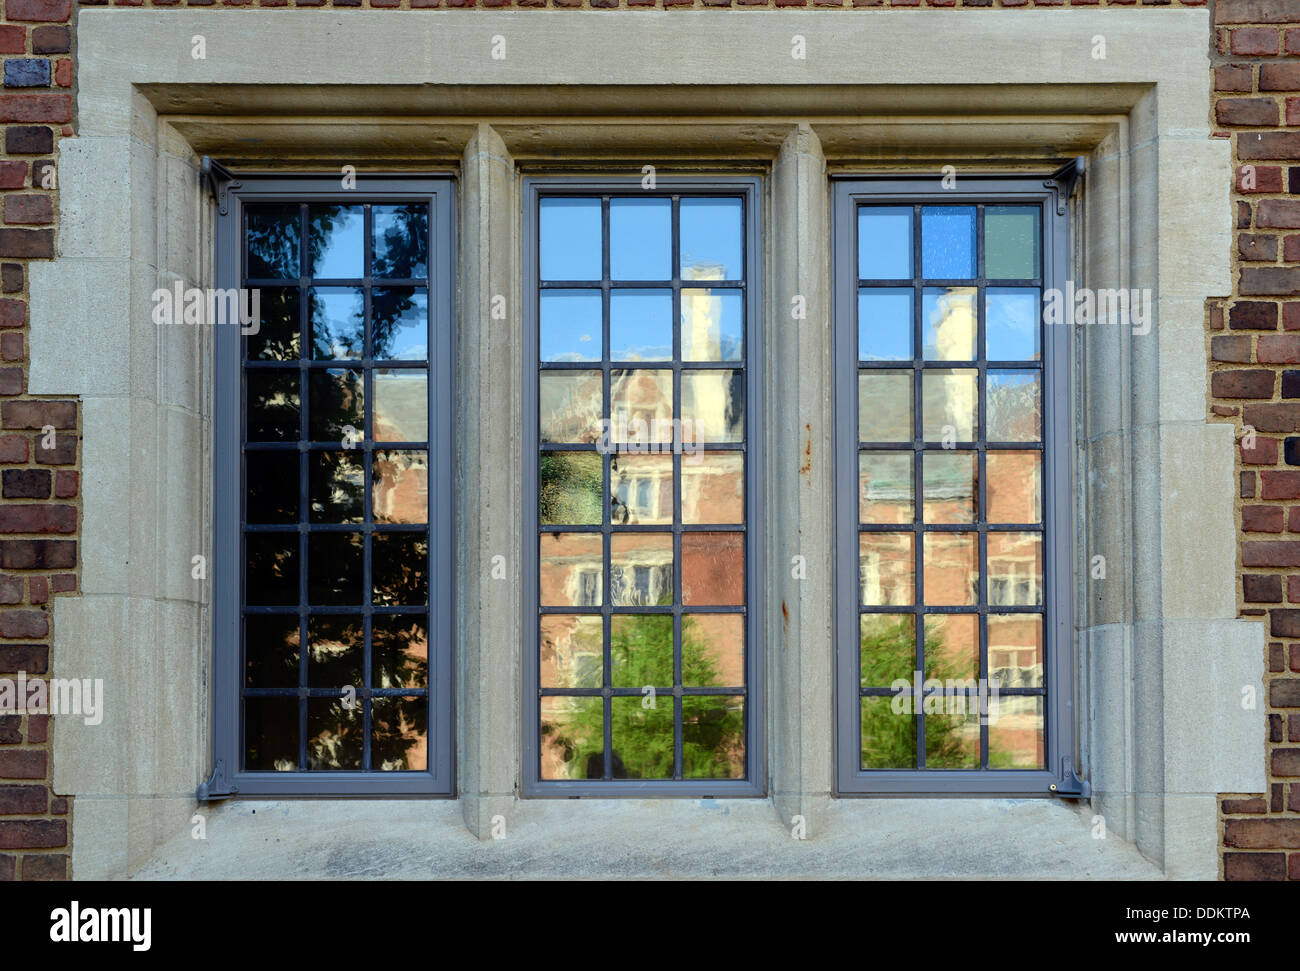 Renovated window, Calhoun Residential College, Yale University.  New double pane replacement windows designed to look old. Stock Photo